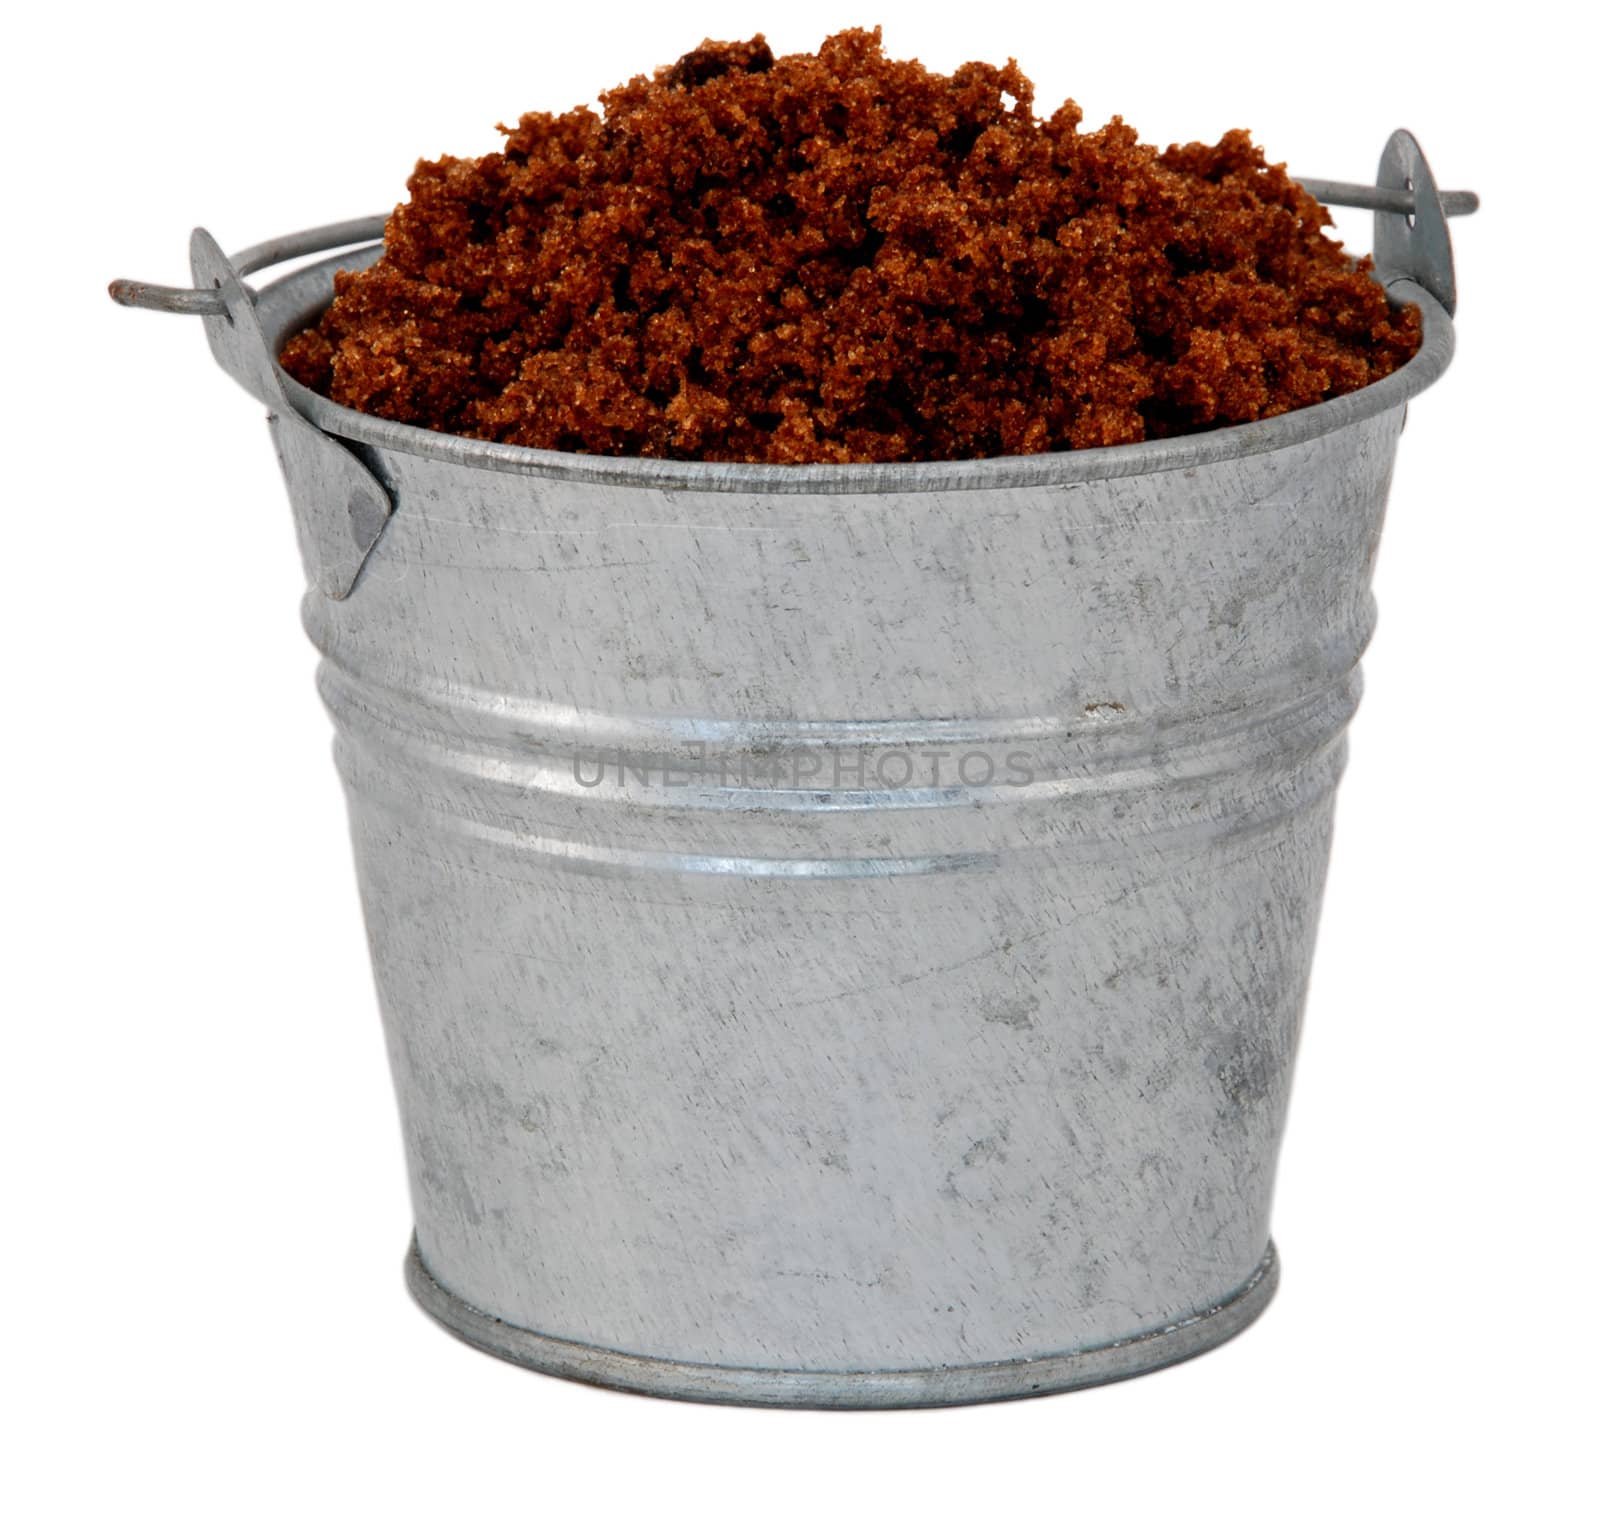 Dark brown soft / muscovado sugar in a miniature metal bucket, isolated on a white background